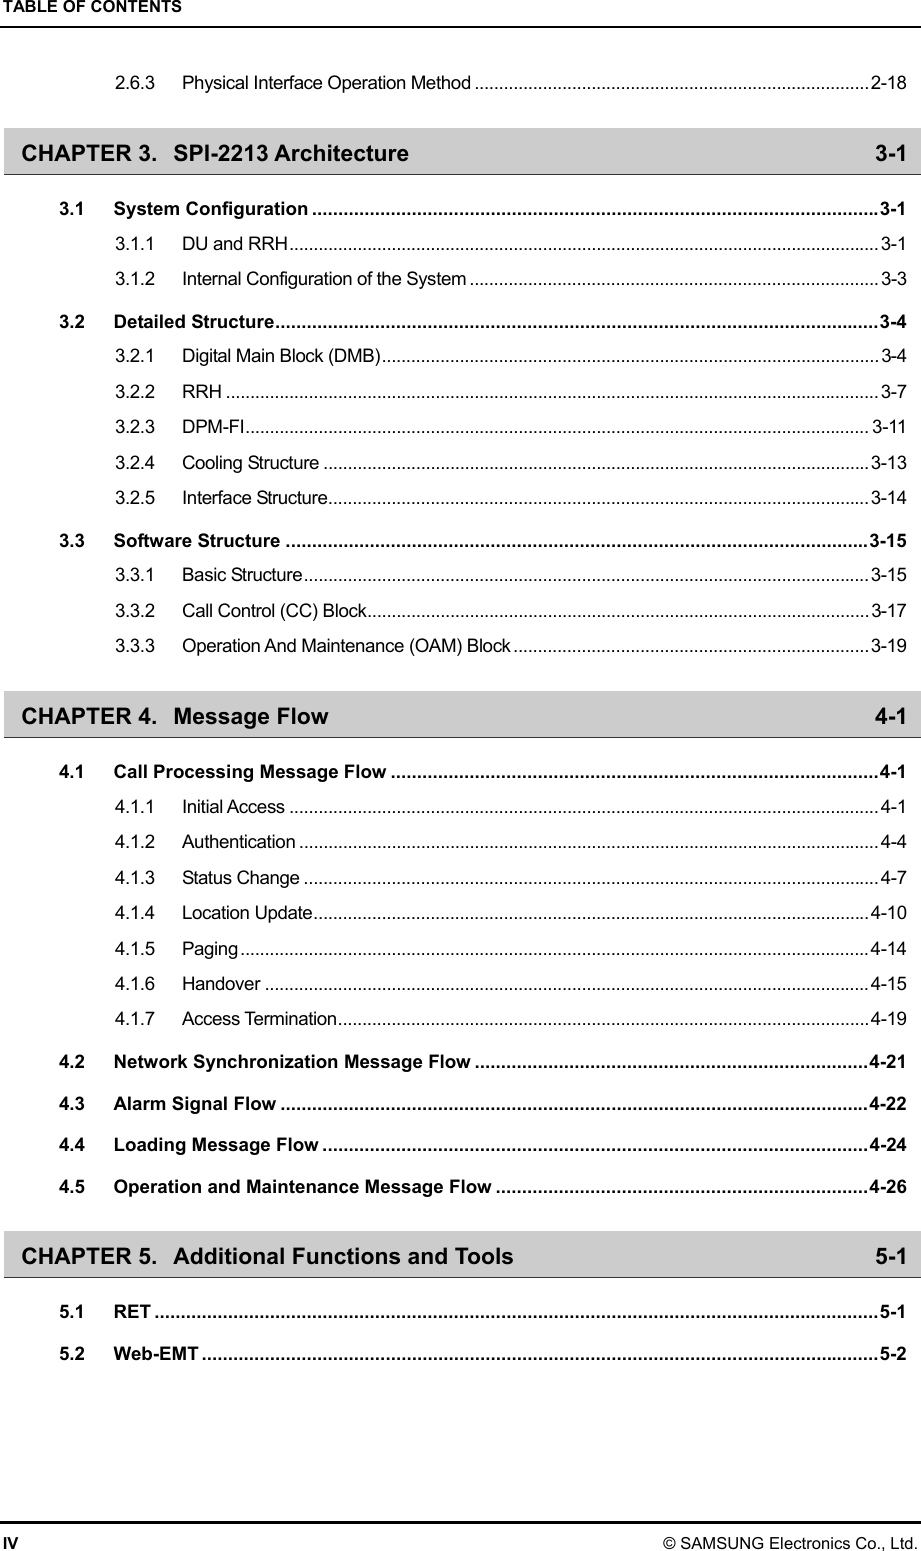 TABLE OF CONTENTS IV © SAMSUNG Electronics Co., Ltd. 2.6.3 Physical Interface Operation Method .................................................................................2-18 CHAPTER 3. SPI-2213 Architecture  3-1 3.1 System Configuration ............................................................................................................3-1 3.1.1 DU and RRH.........................................................................................................................3-1 3.1.2 Internal Configuration of the System ....................................................................................3-3 3.2 Detailed Structure...................................................................................................................3-4 3.2.1 Digital Main Block (DMB)......................................................................................................3-4 3.2.2 RRH ...................................................................................................................................... 3-7 3.2.3 DPM-FI................................................................................................................................ 3-11 3.2.4 Cooling Structure ................................................................................................................3-13 3.2.5 Interface Structure...............................................................................................................3-14 3.3 Software Structure ...............................................................................................................3-15 3.3.1 Basic Structure....................................................................................................................3-15 3.3.2 Call Control (CC) Block....................................................................................................... 3-17 3.3.3 Operation And Maintenance (OAM) Block .........................................................................3-19 CHAPTER 4. Message Flow  4-1 4.1 Call Processing Message Flow .............................................................................................4-1 4.1.1 Initial Access .........................................................................................................................4-1 4.1.2 Authentication ....................................................................................................................... 4-4 4.1.3 Status Change ...................................................................................................................... 4-7 4.1.4 Location Update..................................................................................................................4-10 4.1.5 Paging.................................................................................................................................4-14 4.1.6 Handover ............................................................................................................................4-15 4.1.7 Access Termination.............................................................................................................4-19 4.2 Network Synchronization Message Flow ...........................................................................4-21 4.3 Alarm Signal Flow ................................................................................................................4-22 4.4 Loading Message Flow ........................................................................................................4-24 4.5 Operation and Maintenance Message Flow .......................................................................4-26 CHAPTER 5. Additional Functions and Tools  5-1 5.1 RET ..........................................................................................................................................5-1 5.2 Web-EMT .................................................................................................................................5-2 